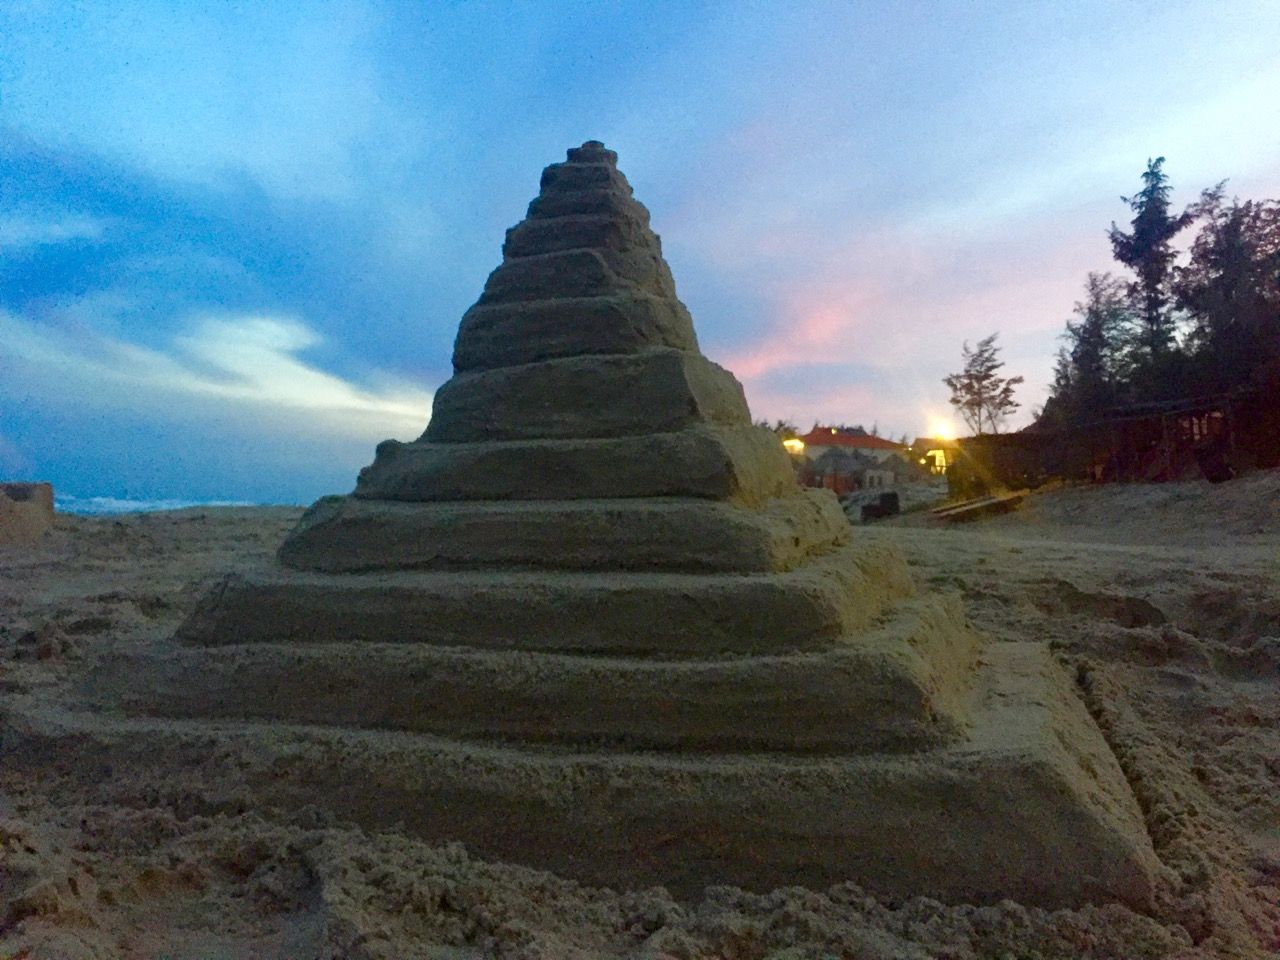 Sandcastle with sunset in the background.